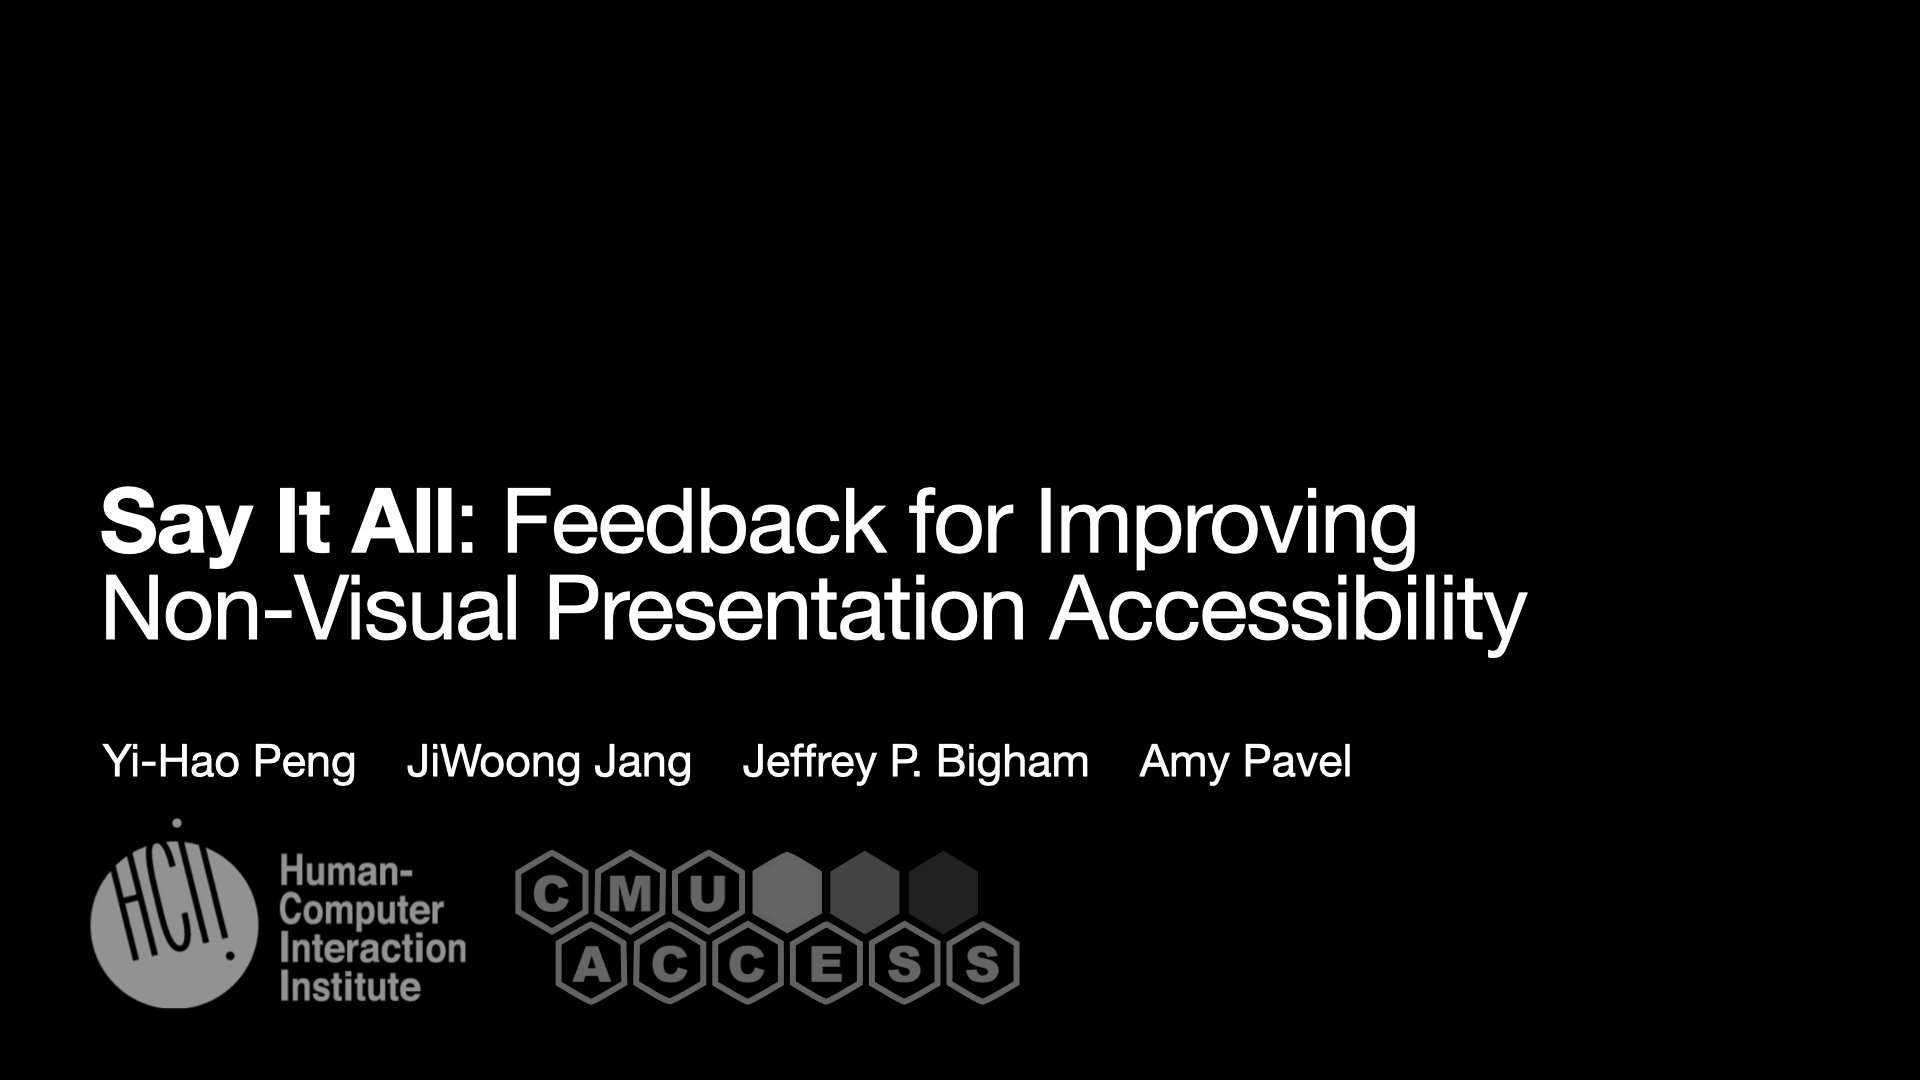 This is the title slide of the paper. The title text - “Say It All: Feedback for Improving Non-Visual Presentation Accessibility” is put at the middle left of the slides. Below it are the authors’ names, including Yi-Hao Peng, JiWoong Jang, Jeffery P.Bigham and Amy Pavel. Two logos put below the names. One of them is the logo of human-computer interaction institute, and the other is the logo of CMU ACCESS group. The whole deck of slides are mostly styled with black background and white texts.